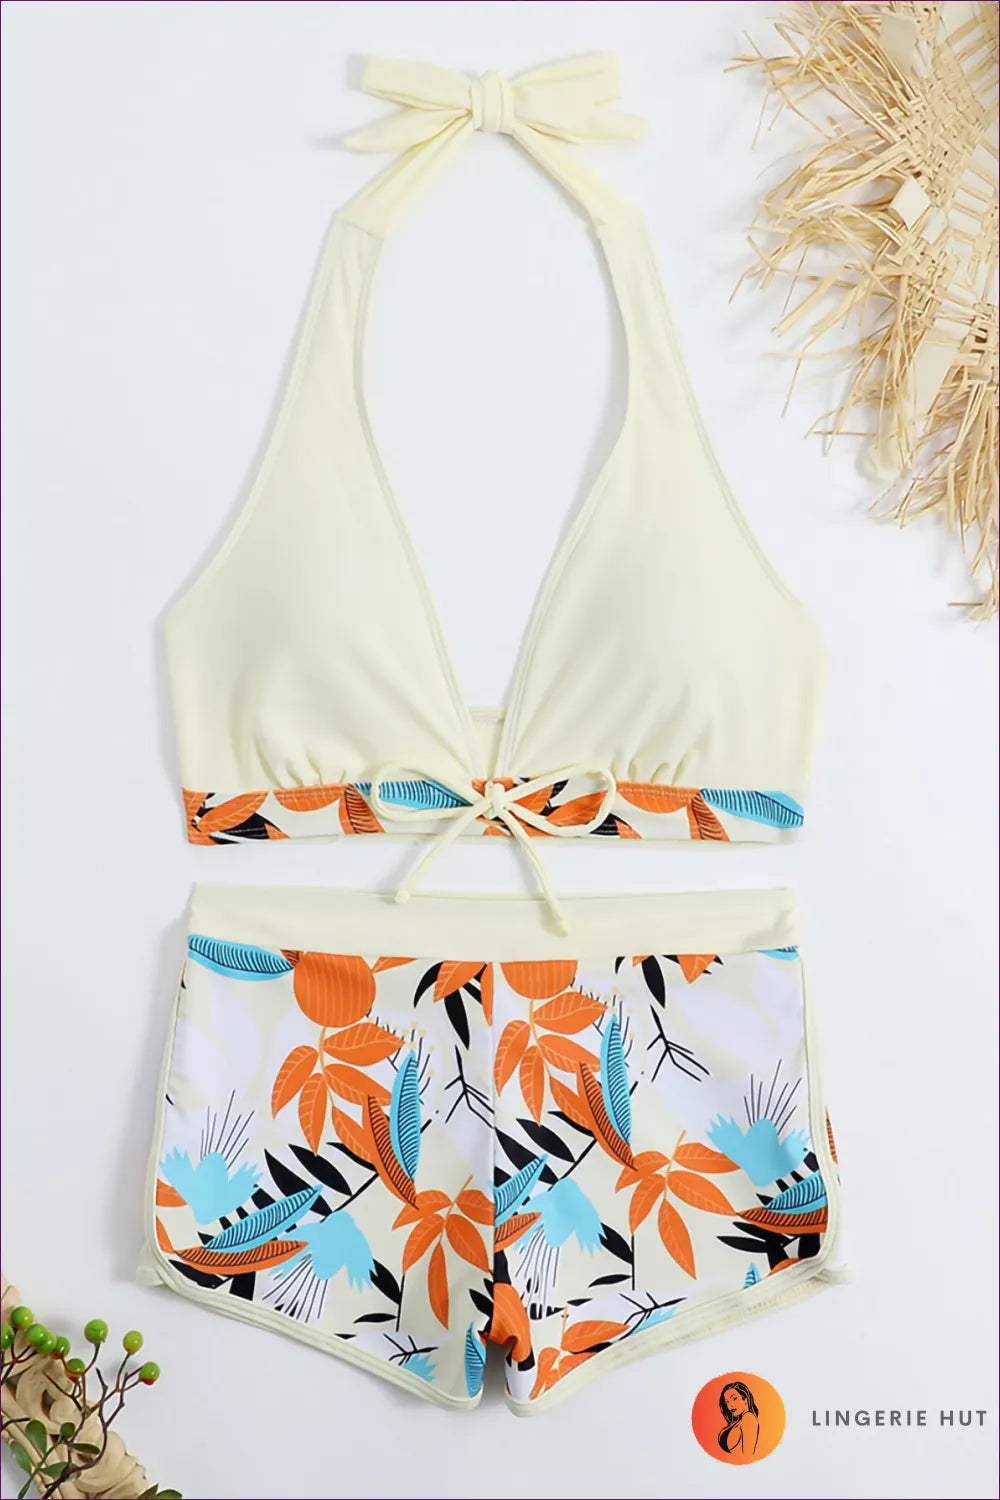 Make a Statement At Your Next Poolside Gathering With Our Alluring Print High Waist Swimsuit. Trendy High